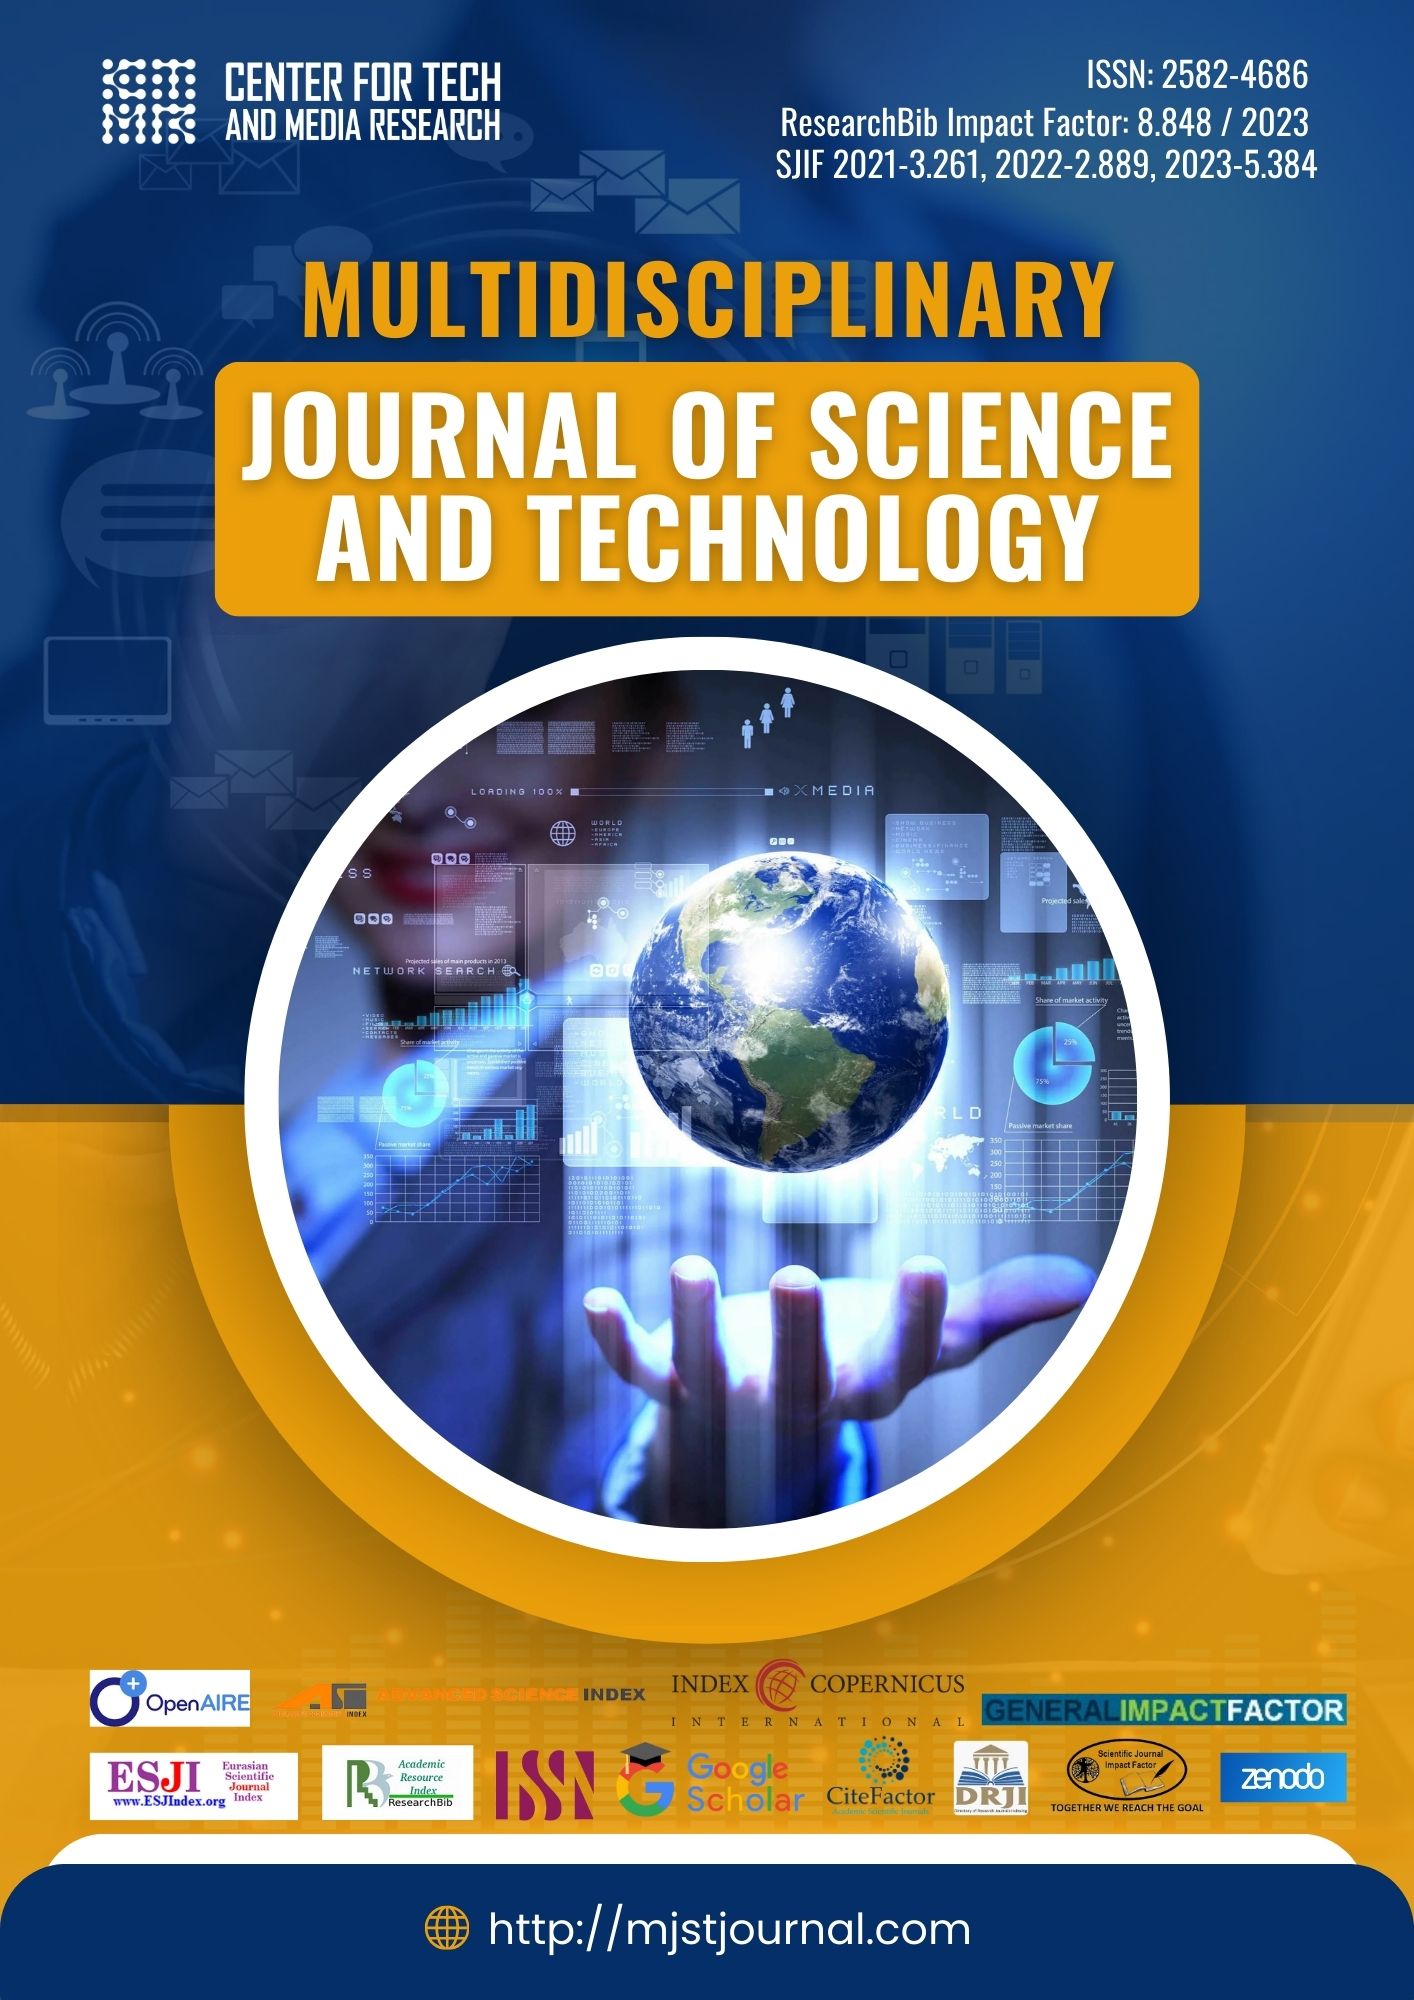                         View Vol. 4 No. 5 (2024): MULTIDISCIPLINARY JOURNAL OF SCIENCE AND TECHNOLOGY
                    